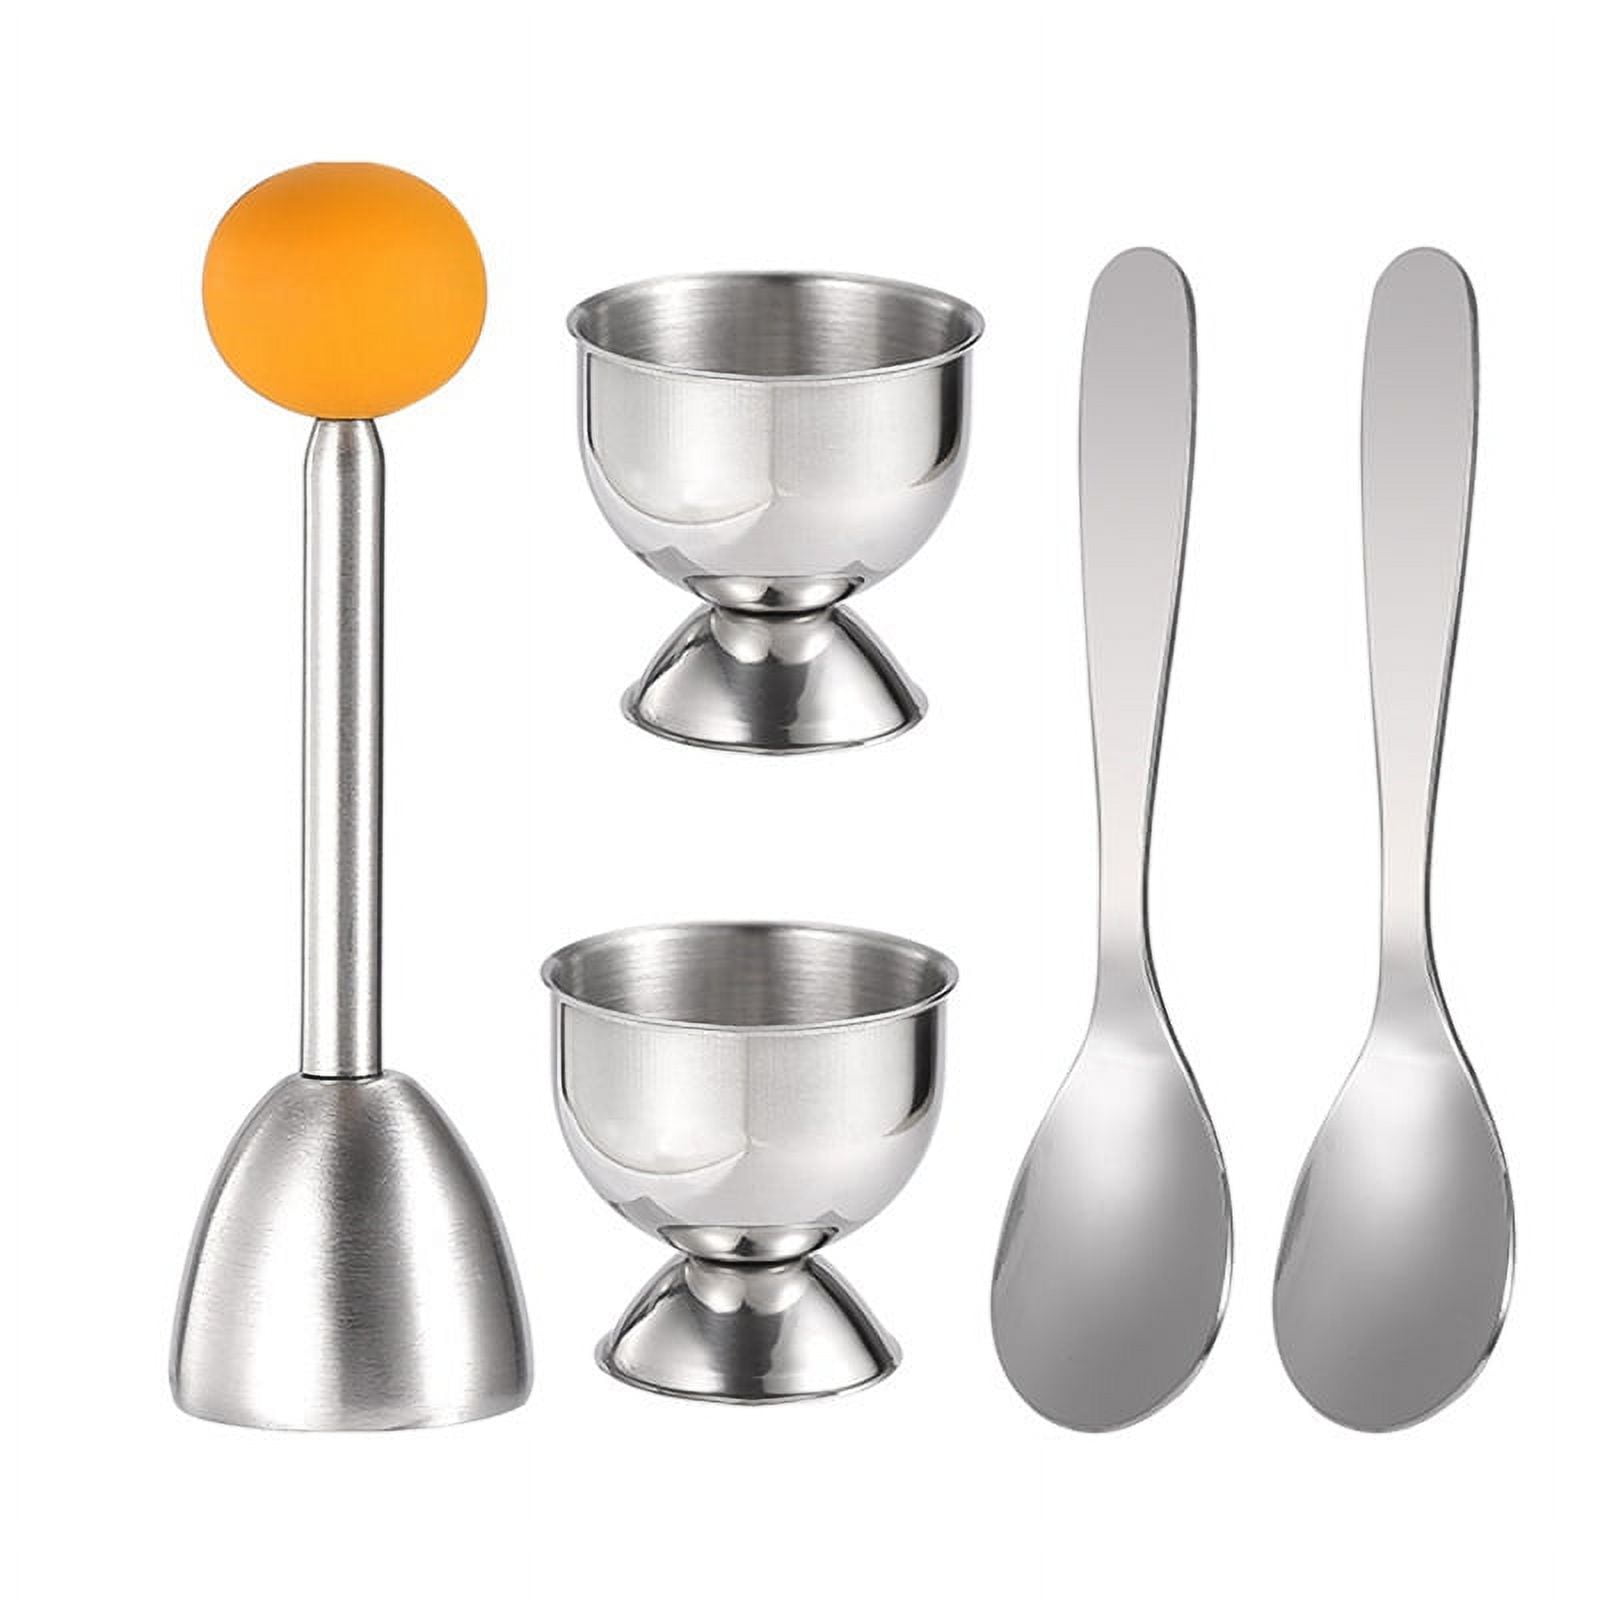 1pc Silver Egg Cup Stainless Steel Egg Holder, Soft Boiled & Hard